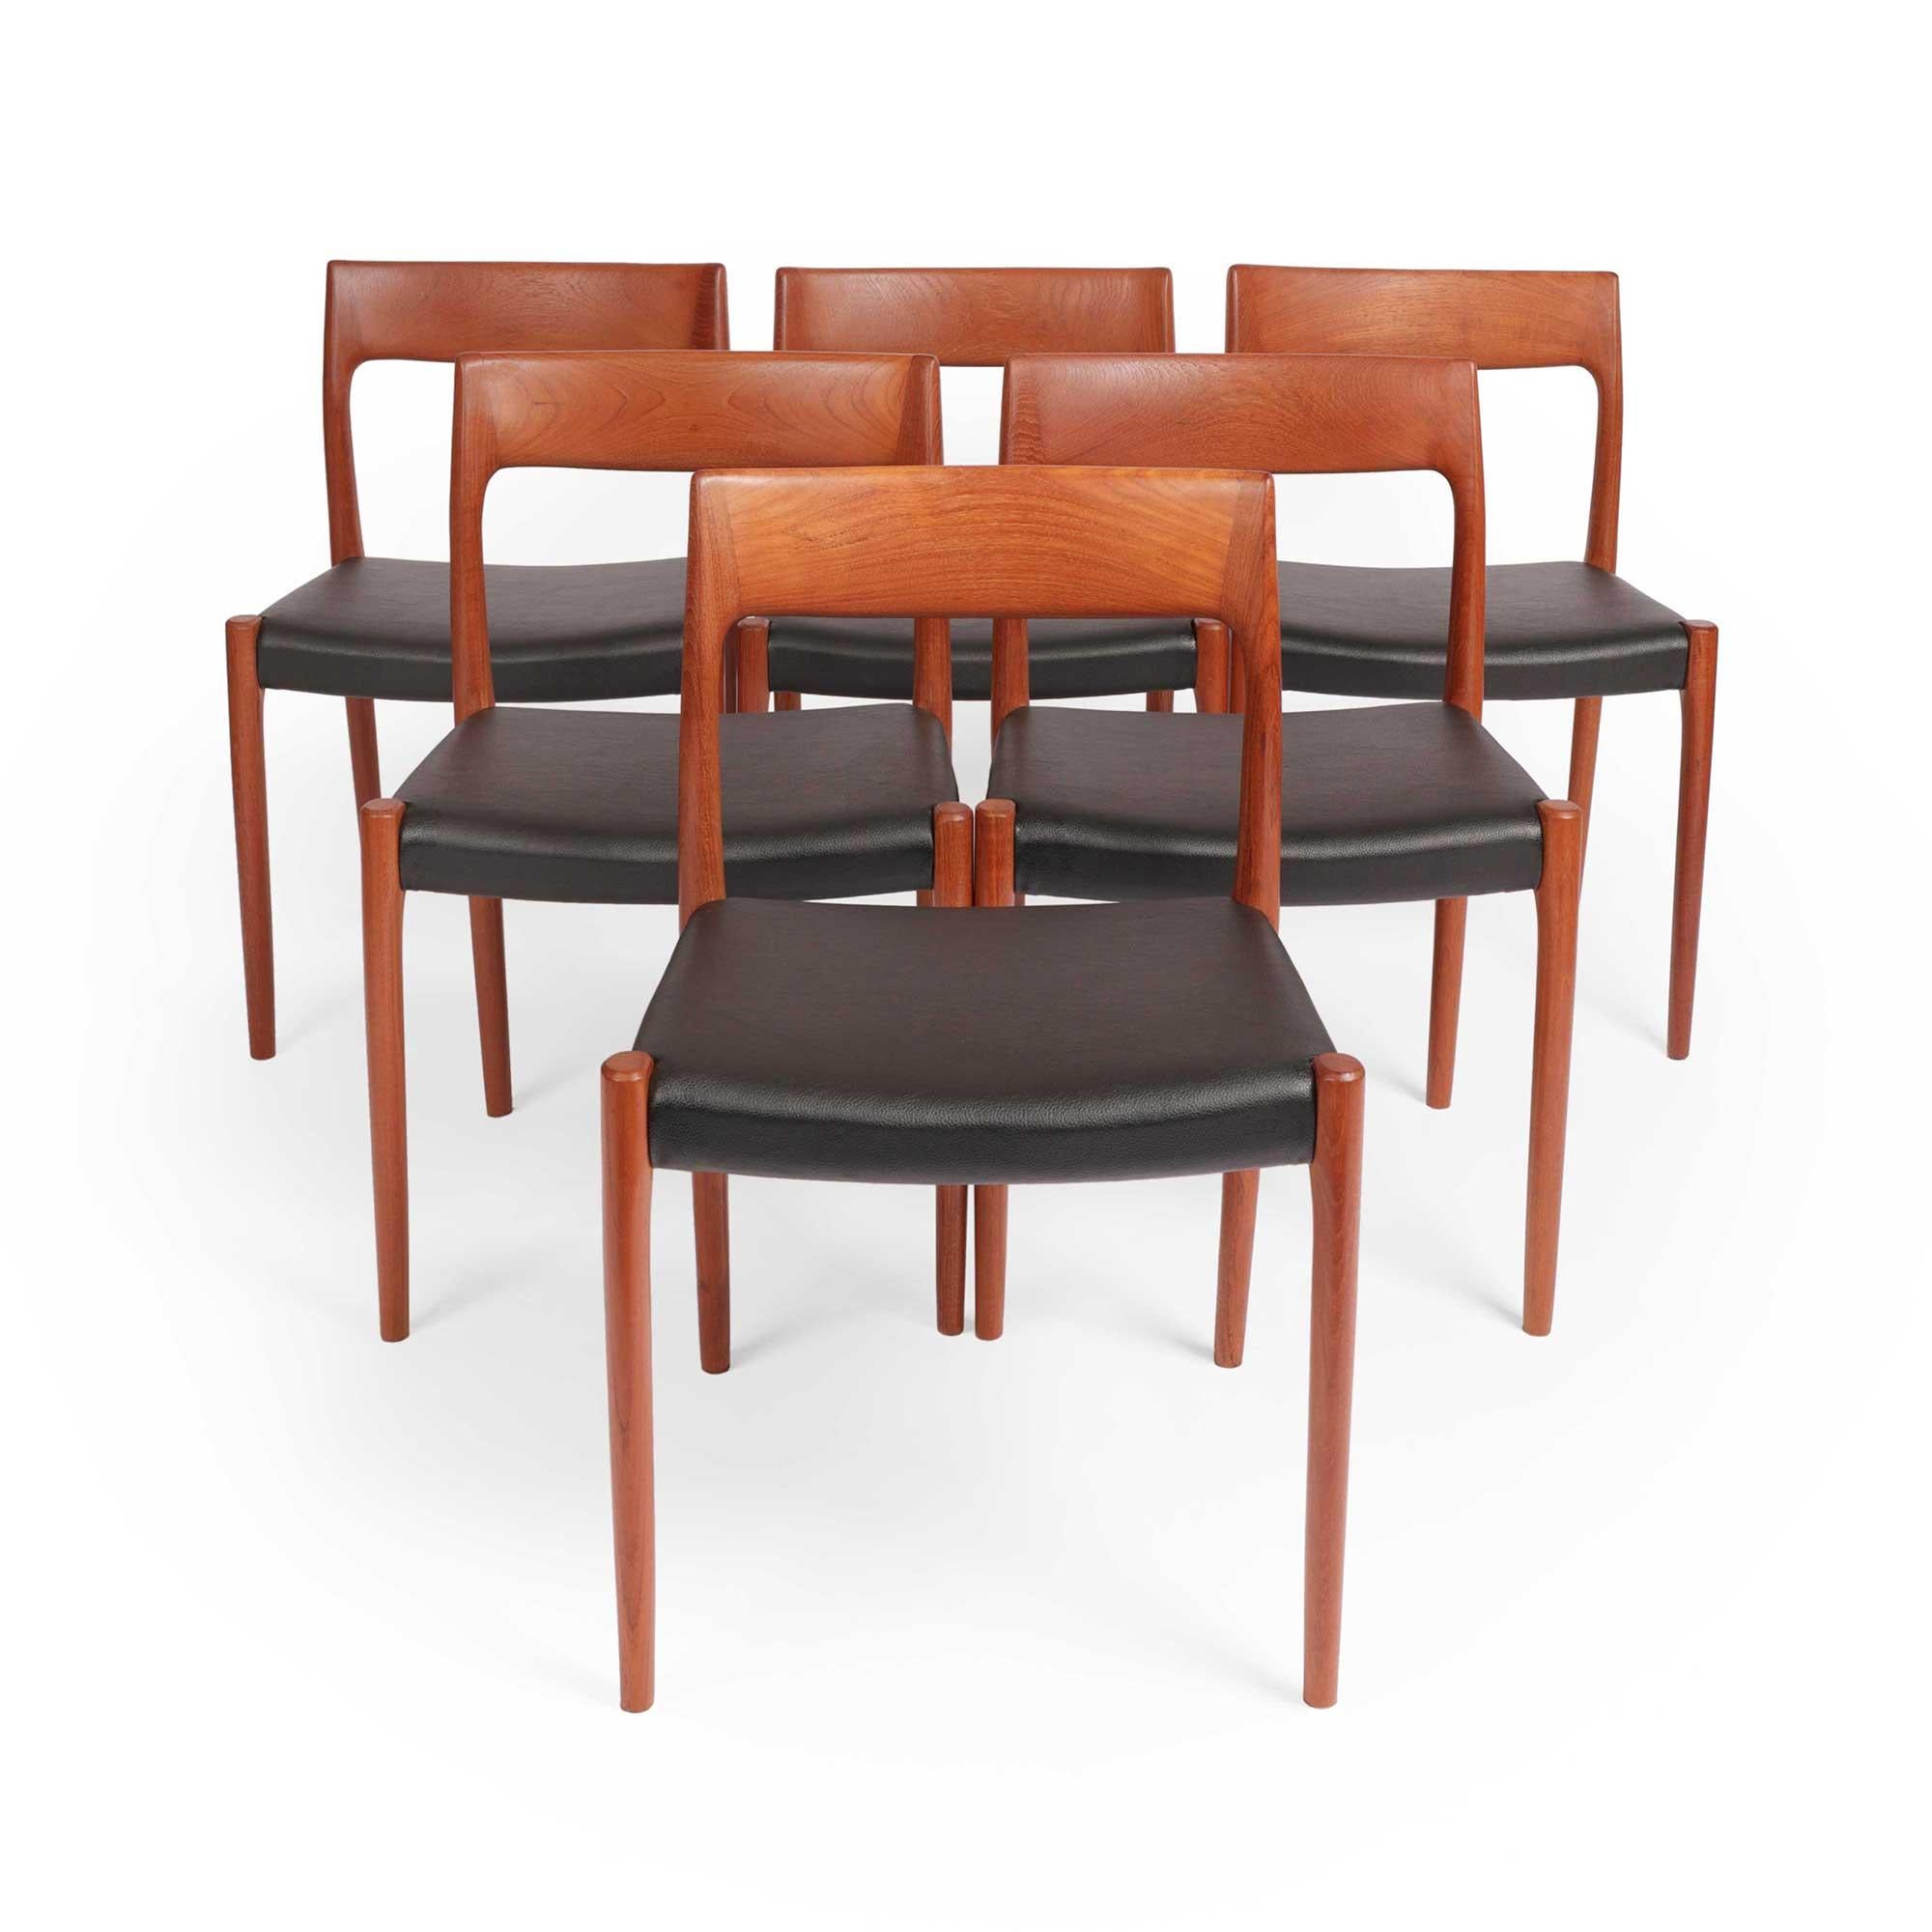 Niels Otto Møller, a distinguished Danish furniture designer and founder of J.L. Møllers Møbelfabrik, left an indelible mark on mid-century modern design. Renowned for his beautifully crafted wooden chairs, Møller's creations epitomized clean lines,